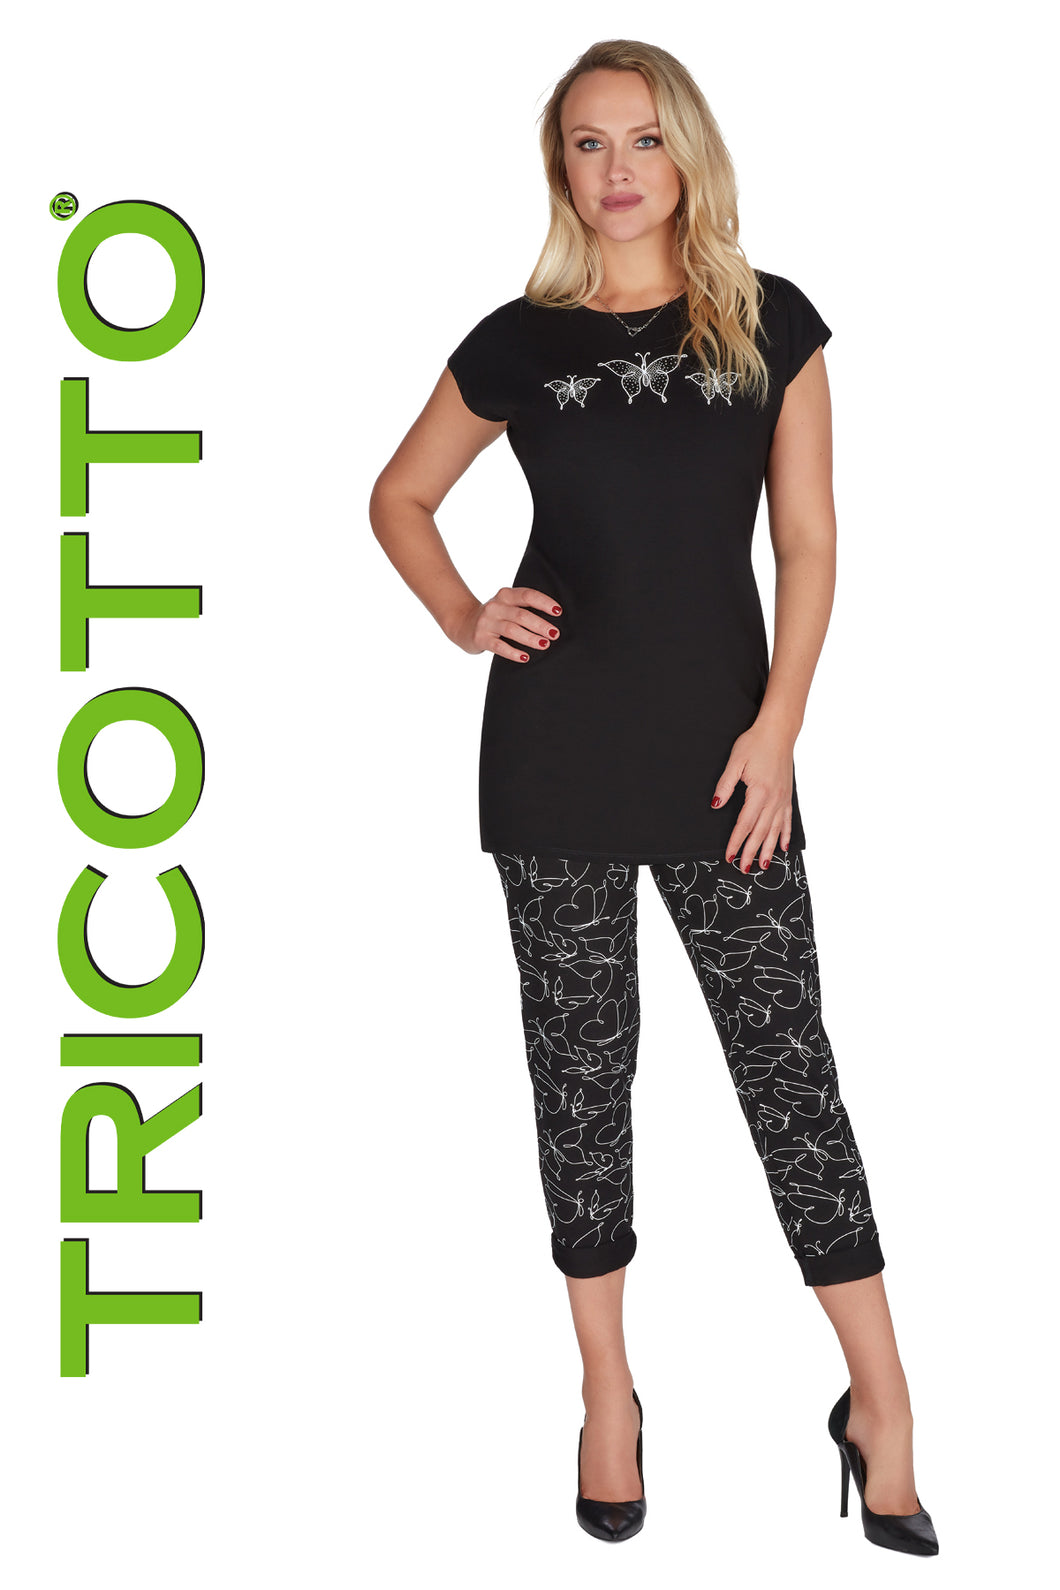 Tricotto C-124 Short Sleeve Printed Tunic Top